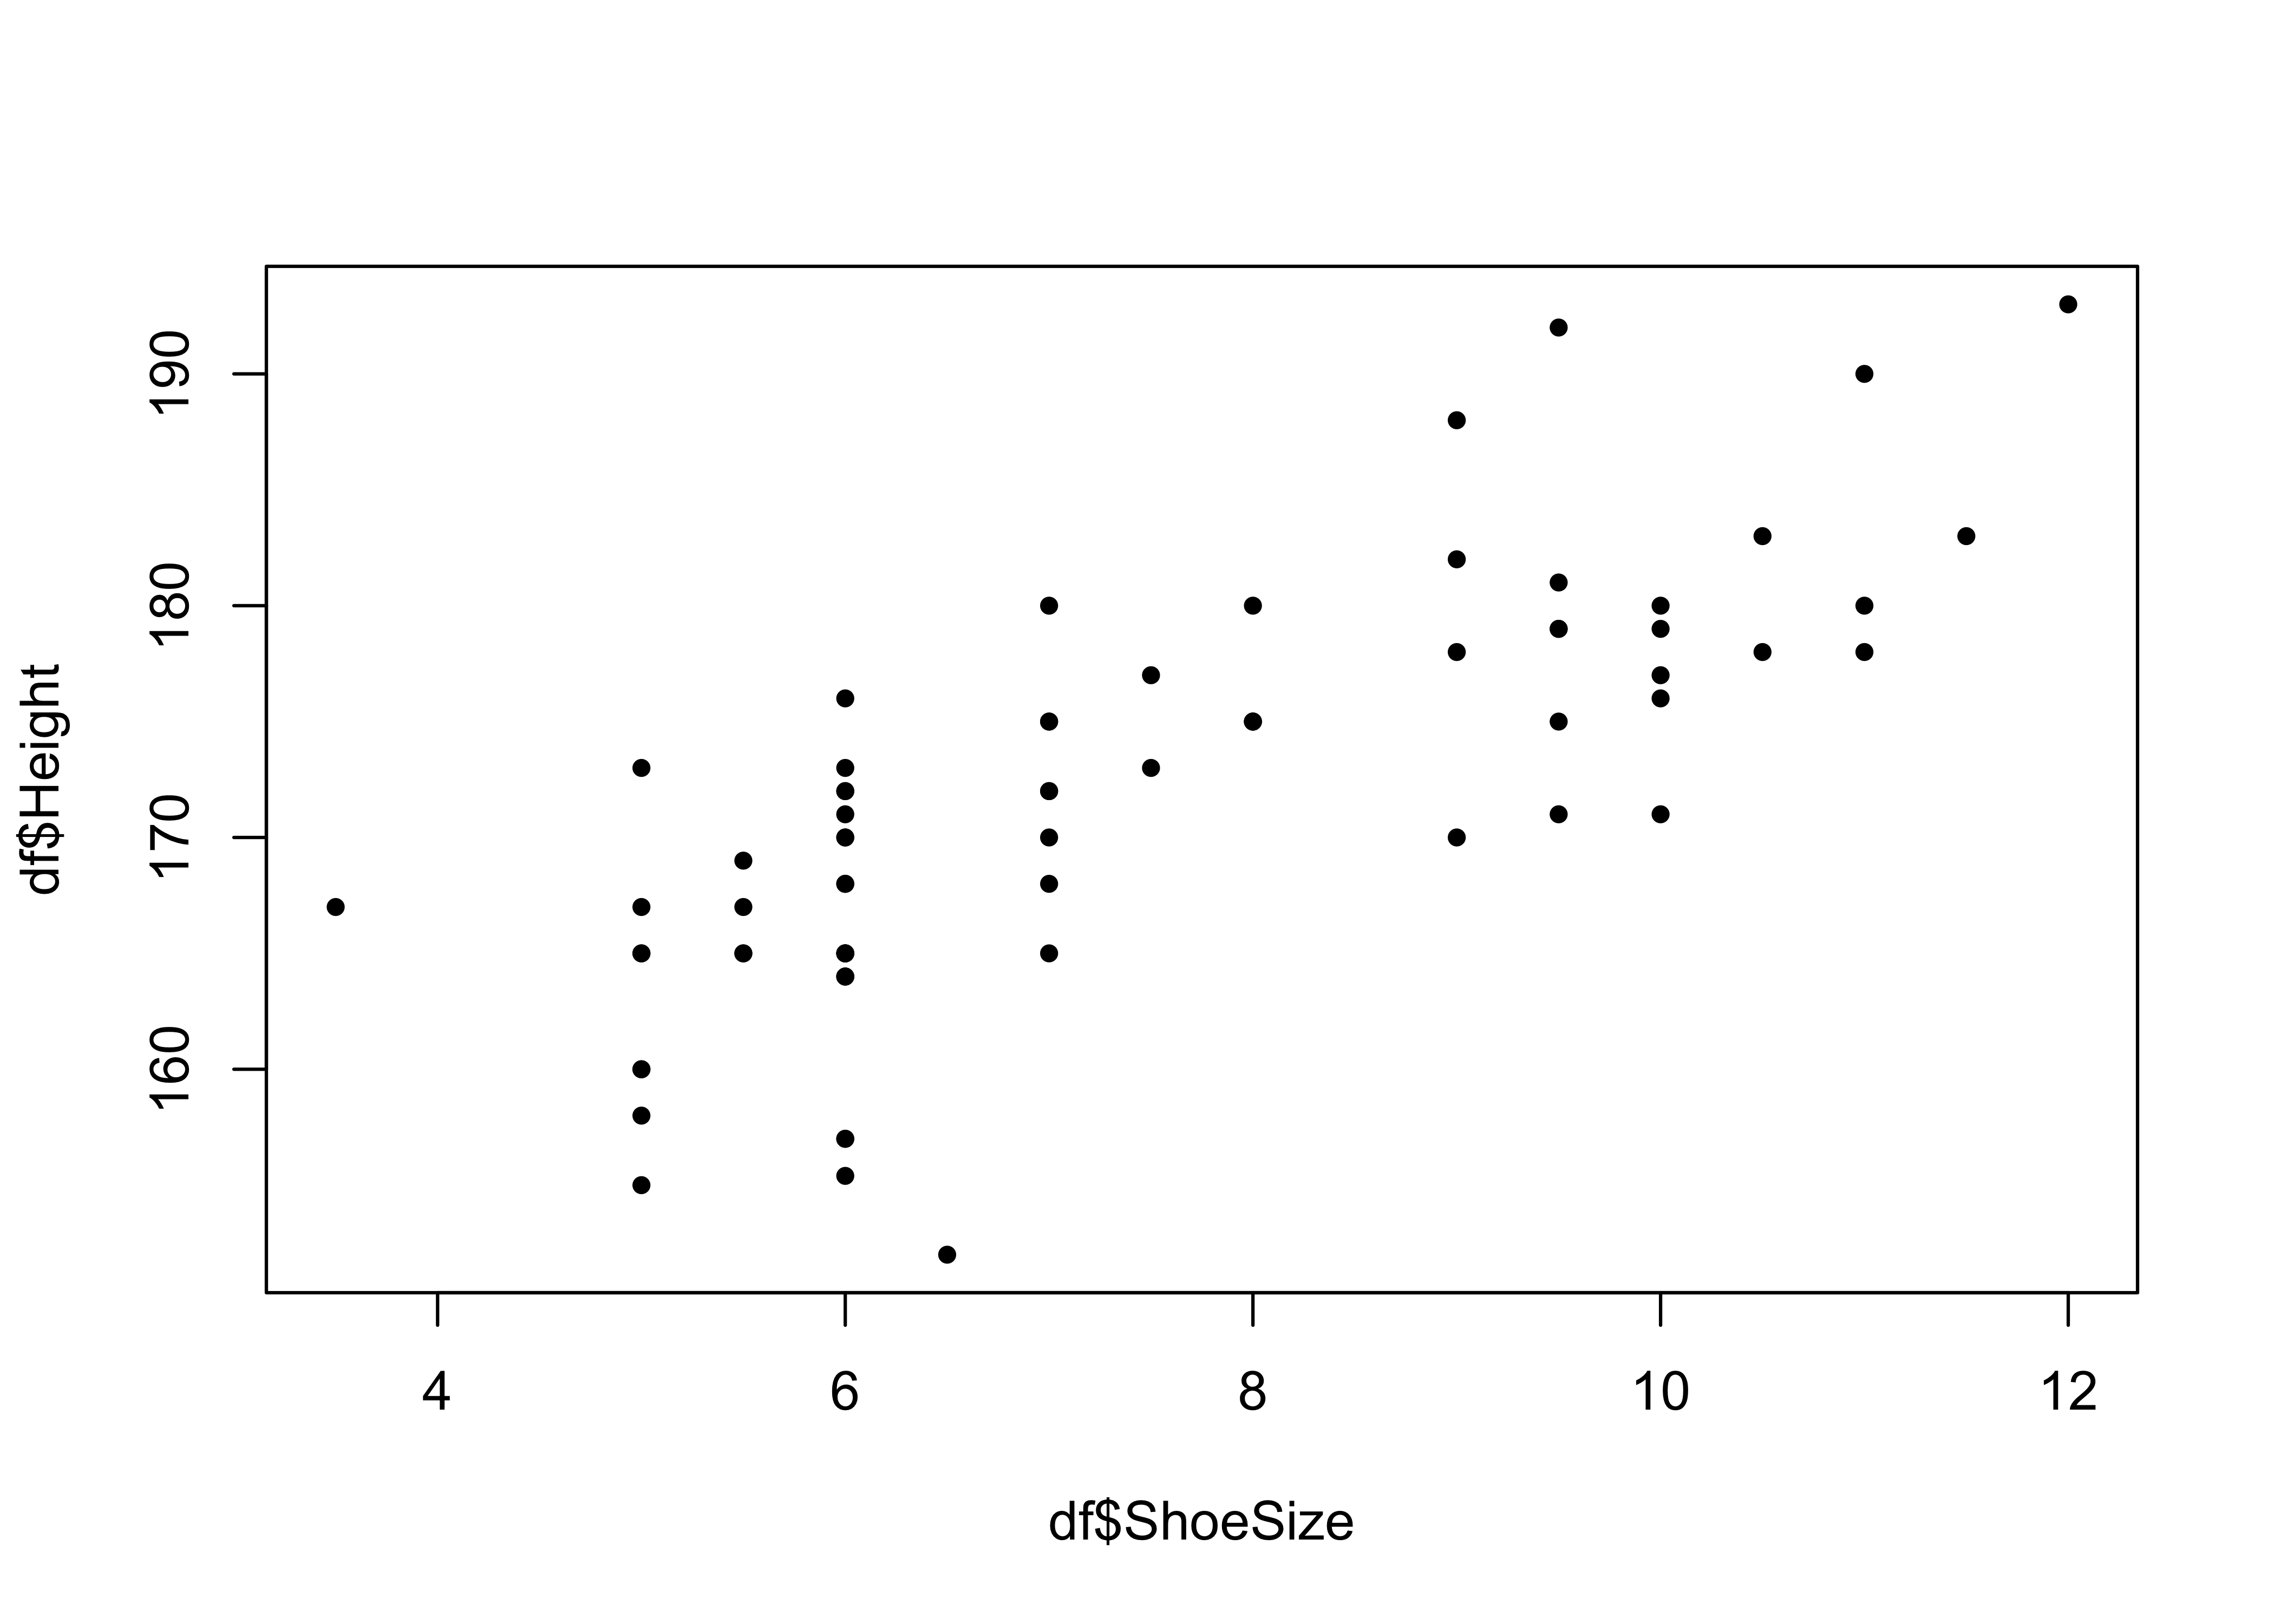 A simple scatter plot of correlations.